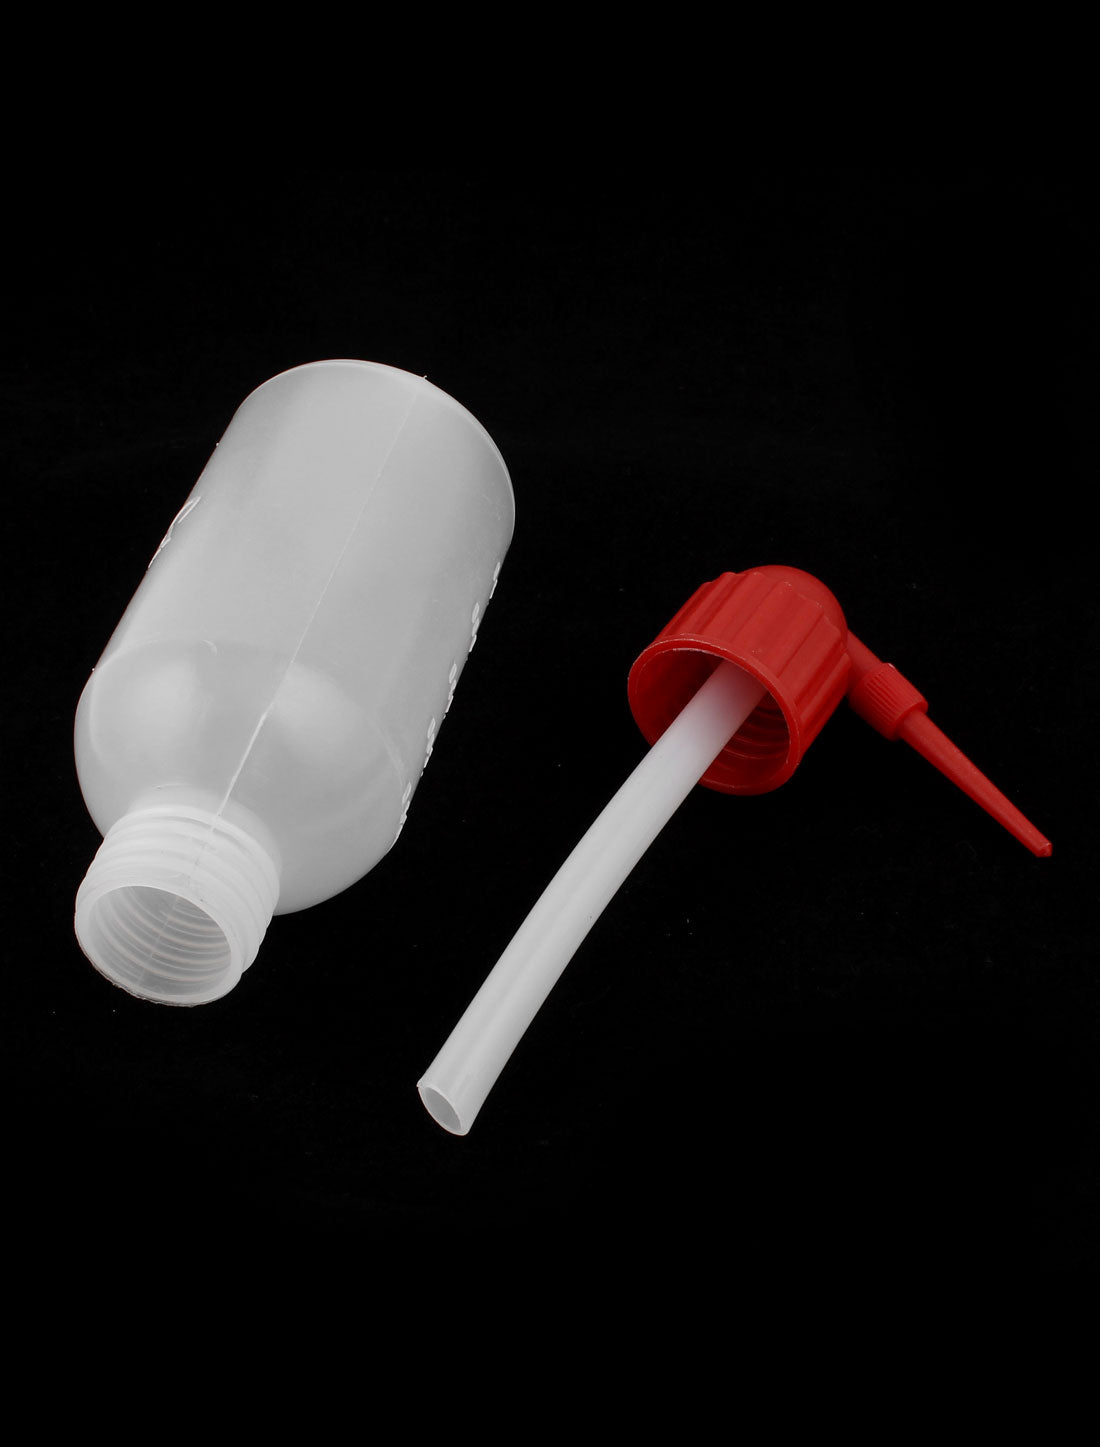 uxcell Uxcell Red Top Cap Clear White Plastic Laboratory Measuring Squeeze Bottle 250ml